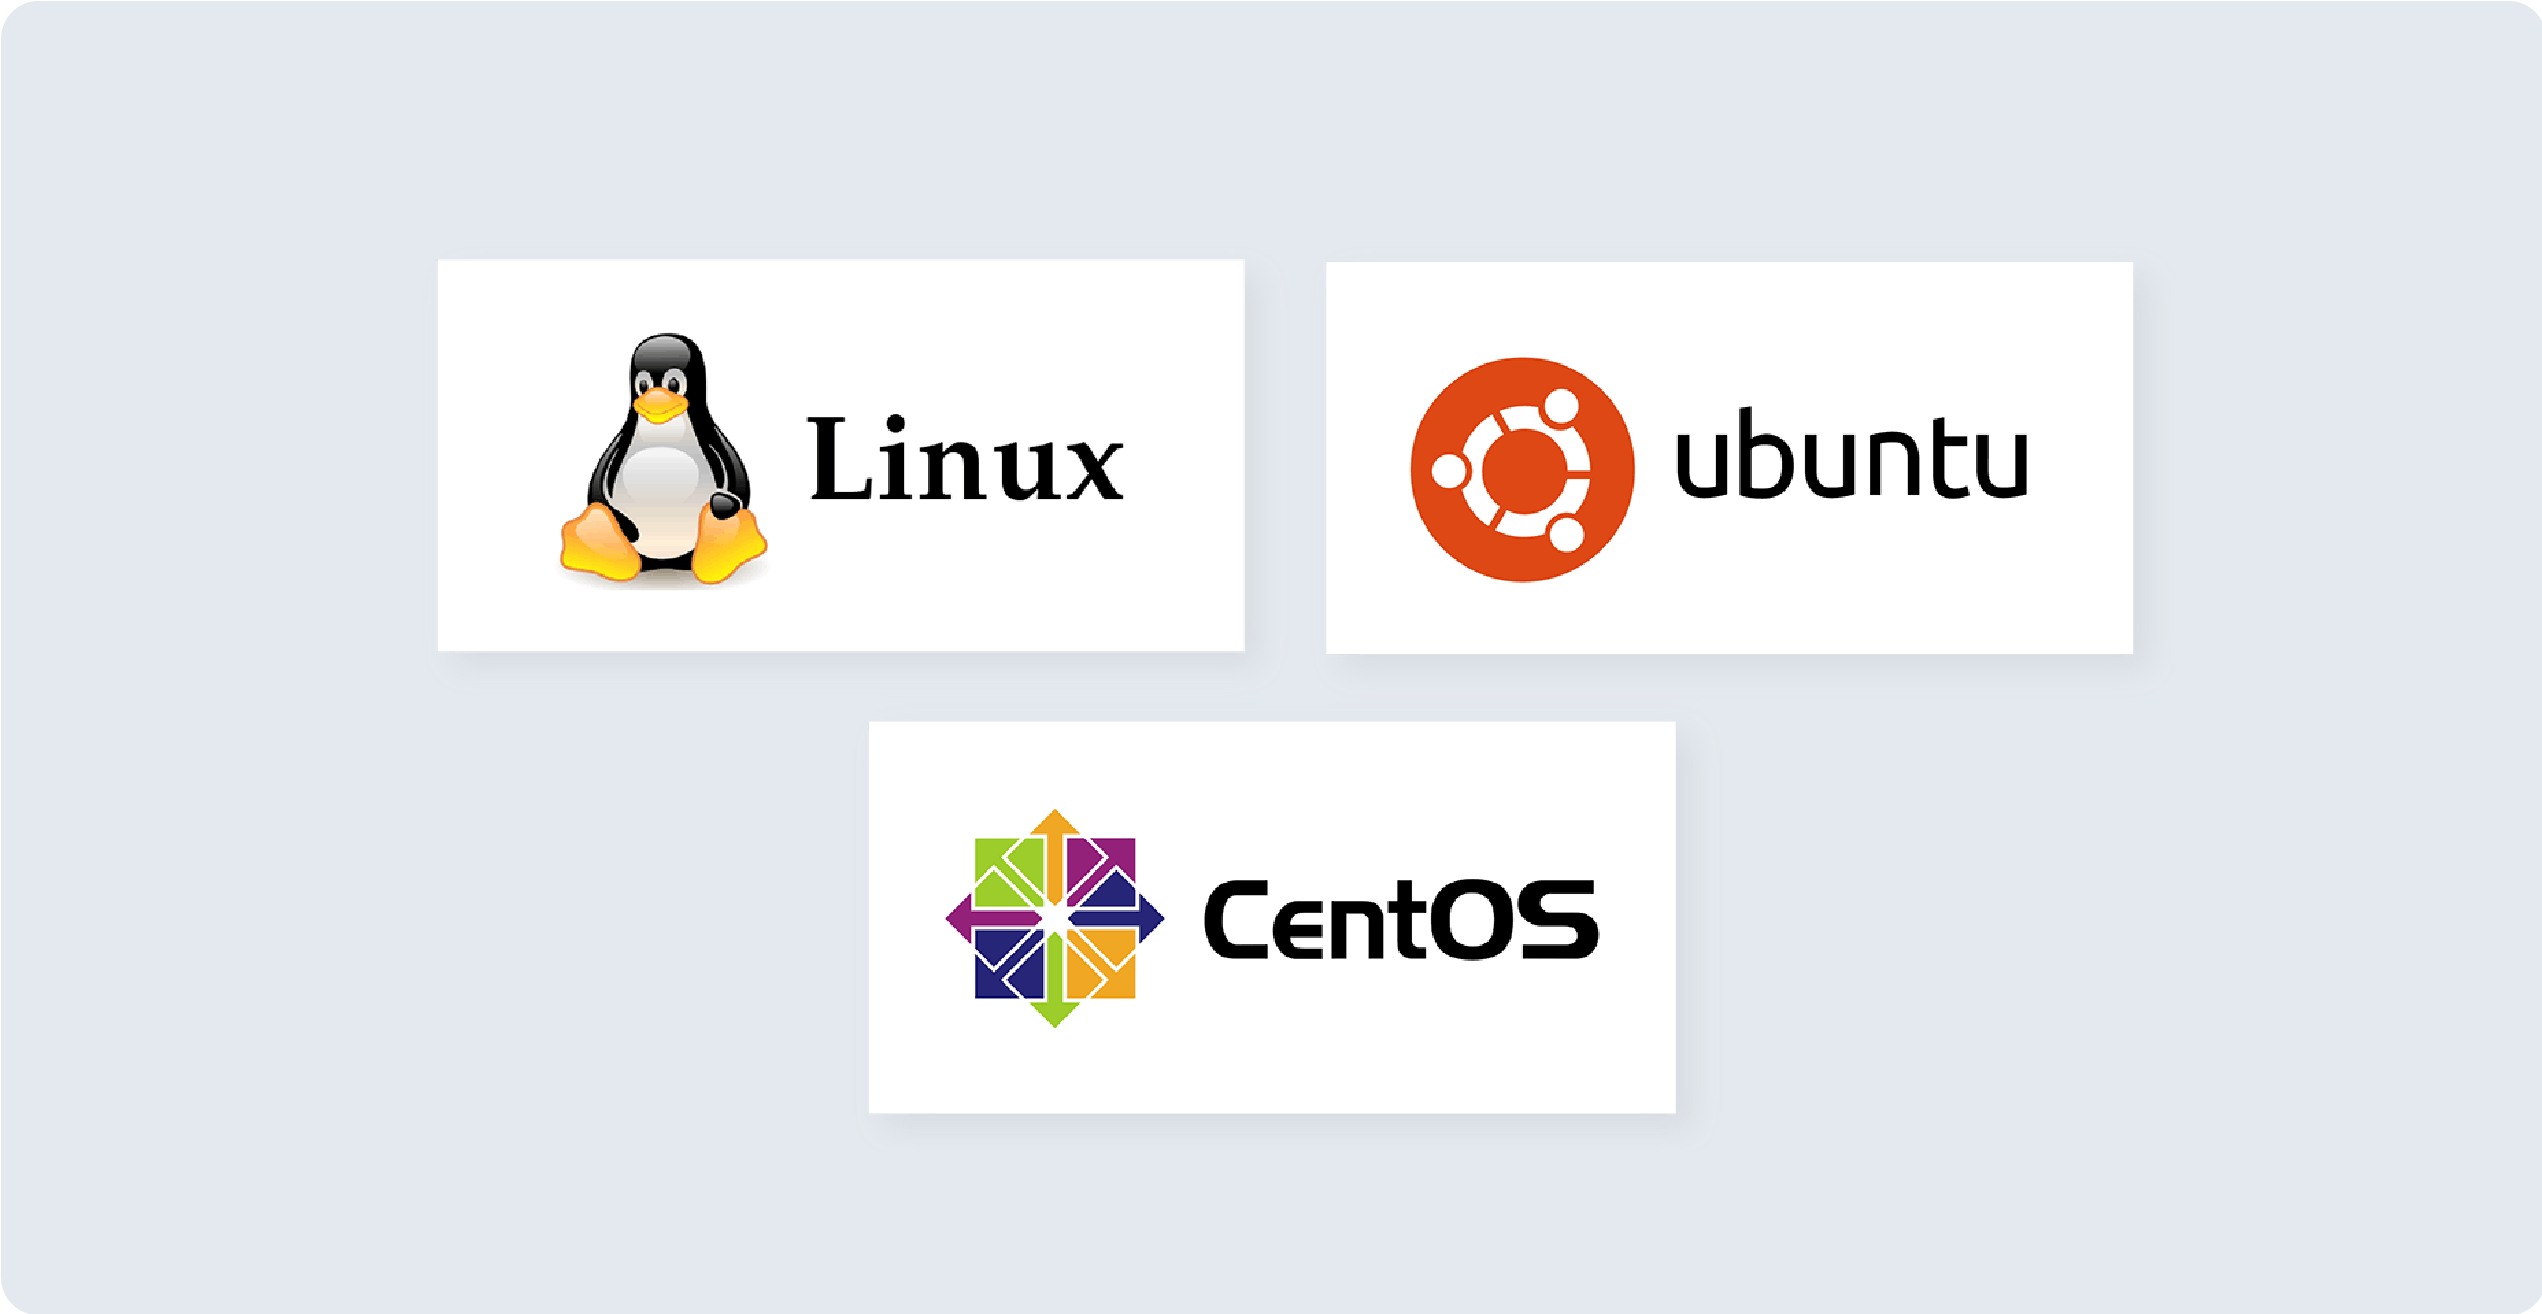 Step 1: Prepare your Linux environment